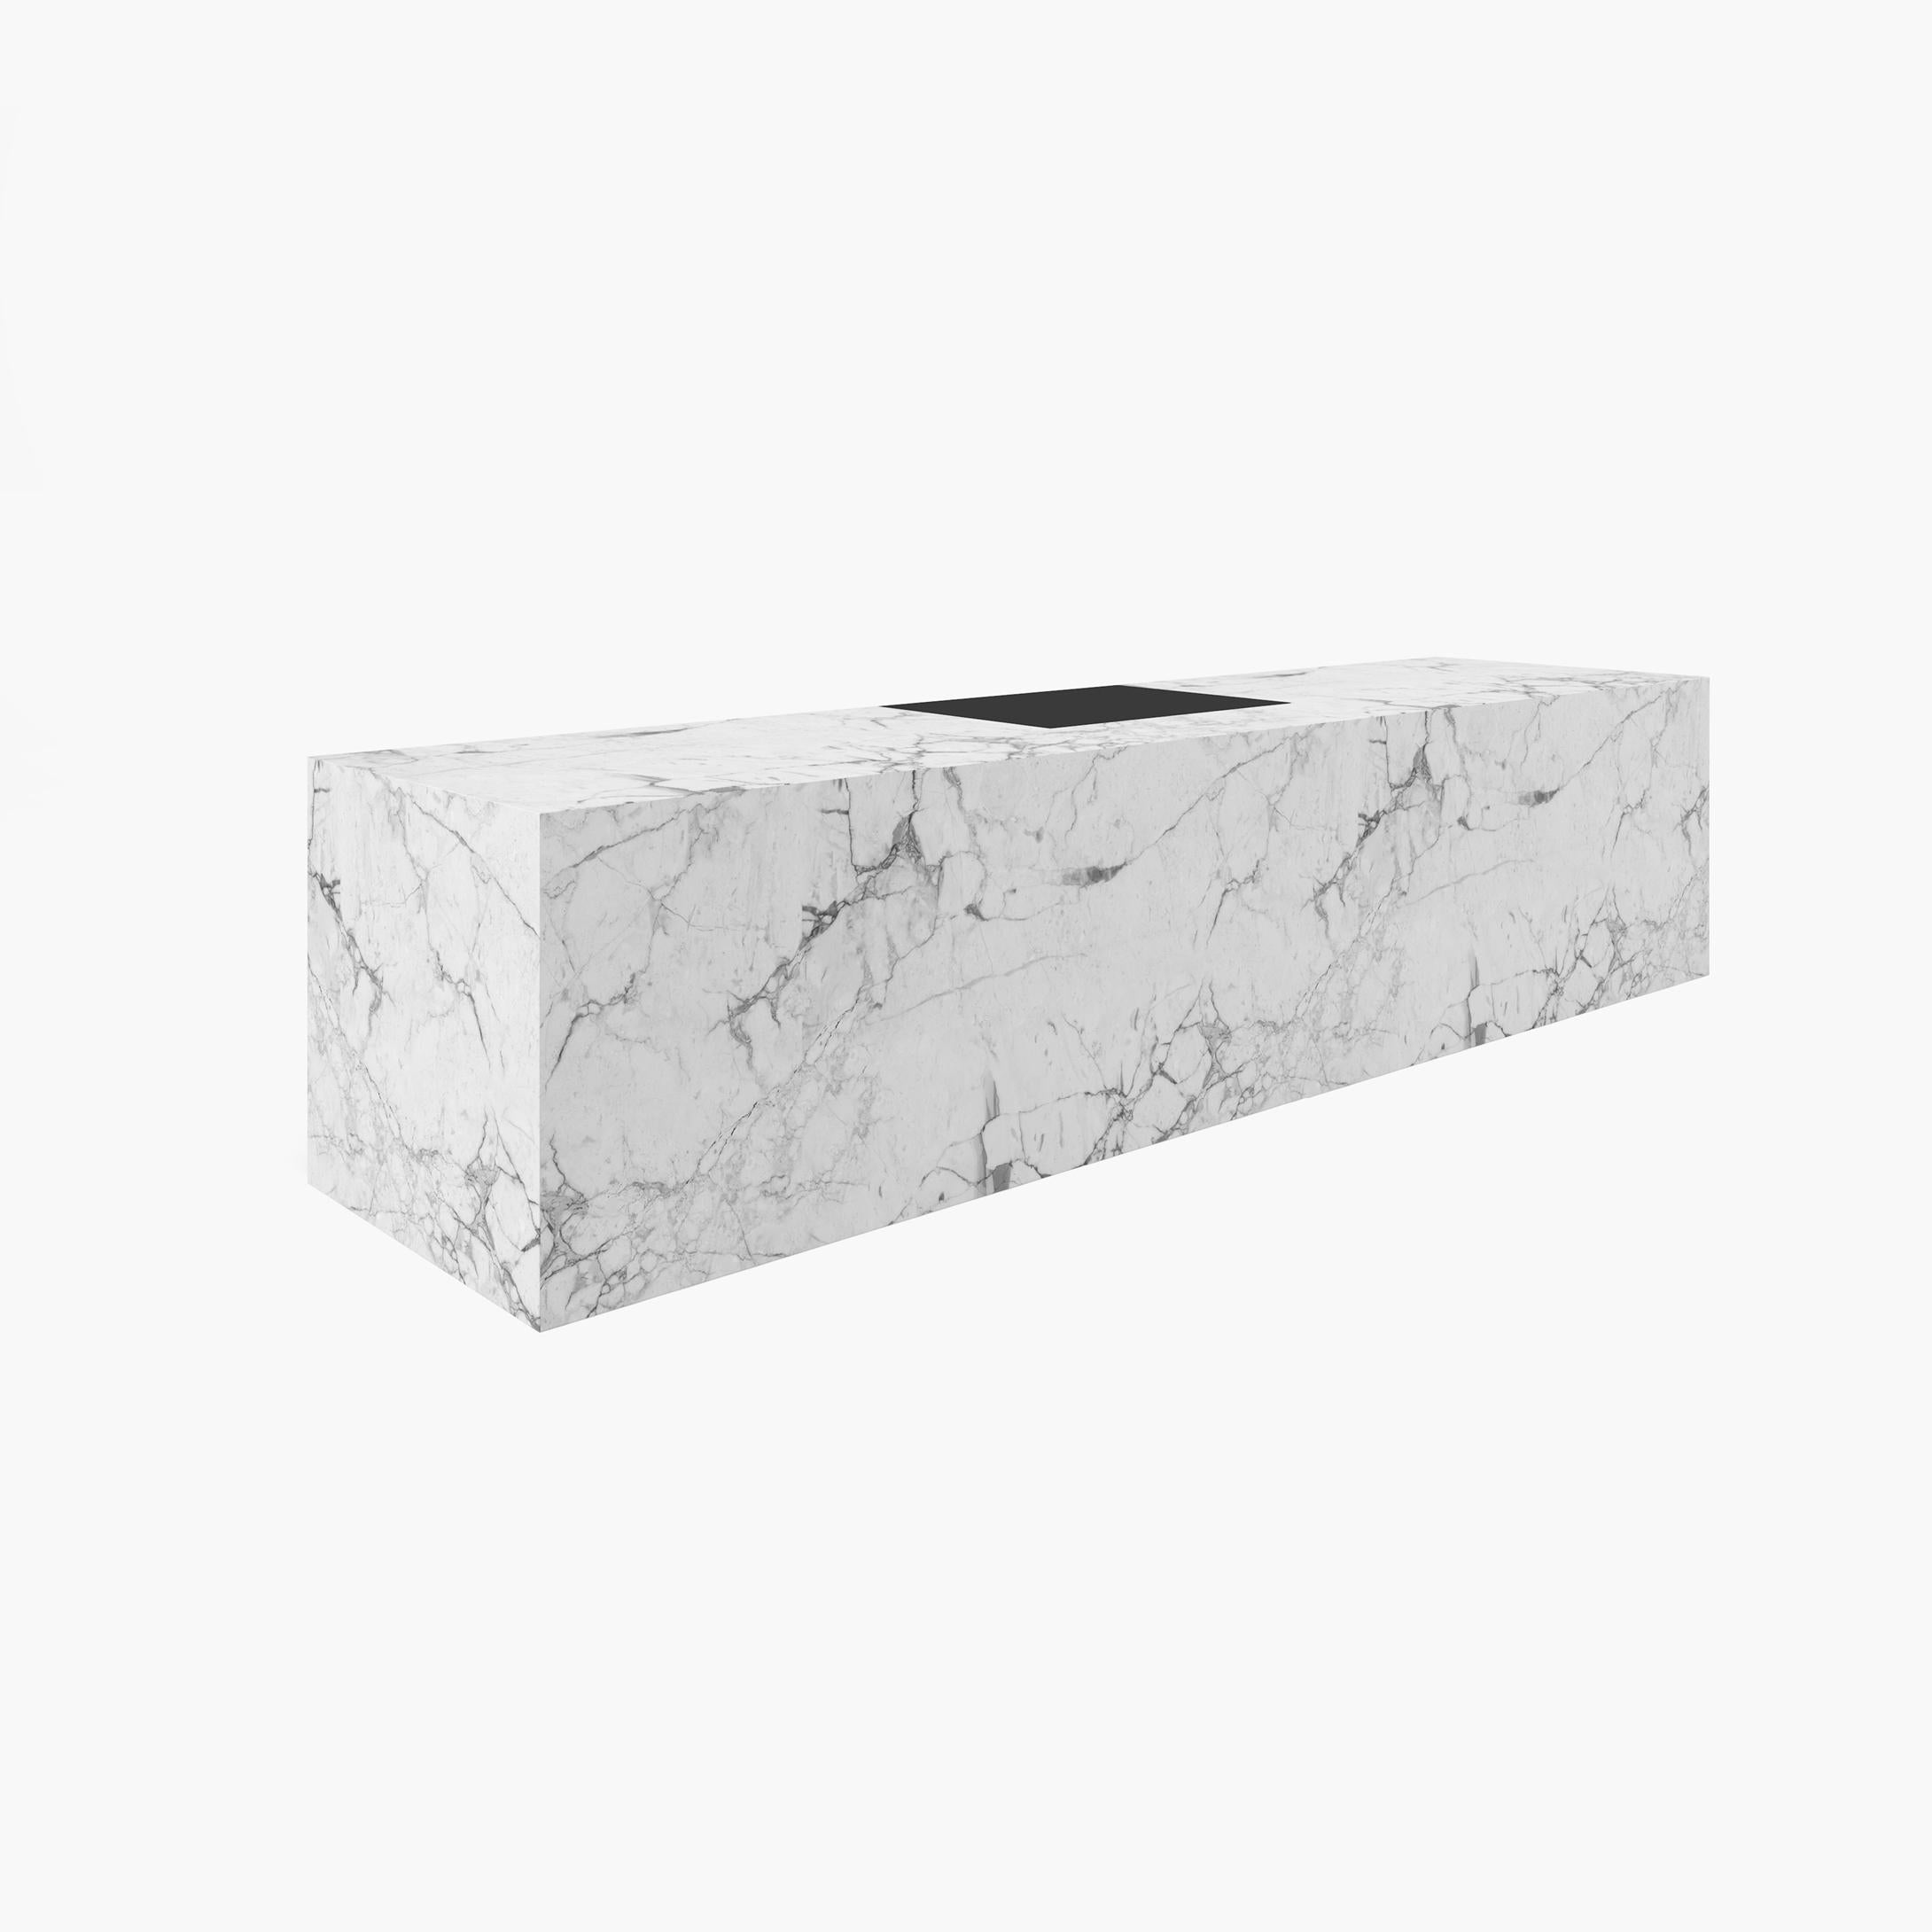 Contemporary Cuboid Desk, White Marble, 400x75x75cm Leather Drawer, Germany Handcrafted pc1/1 For Sale